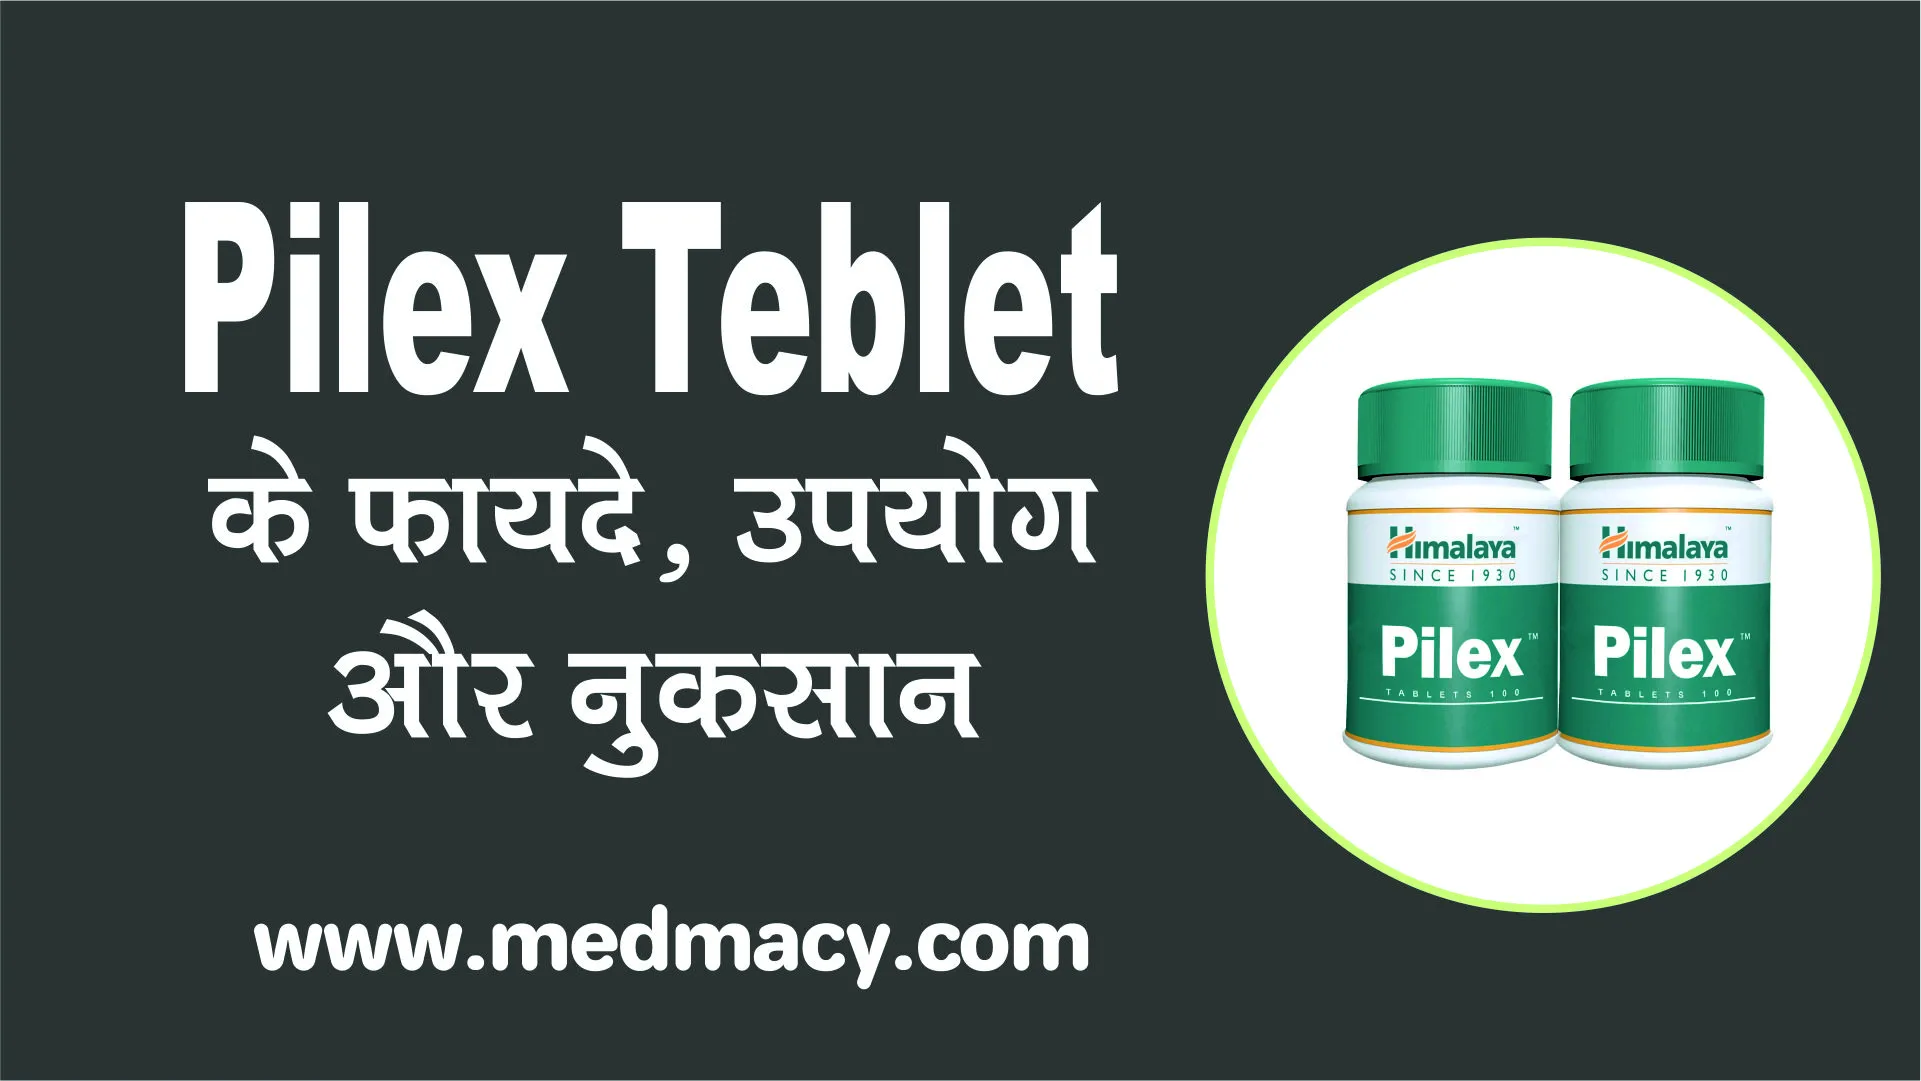 Pilex tablet uses in hindi